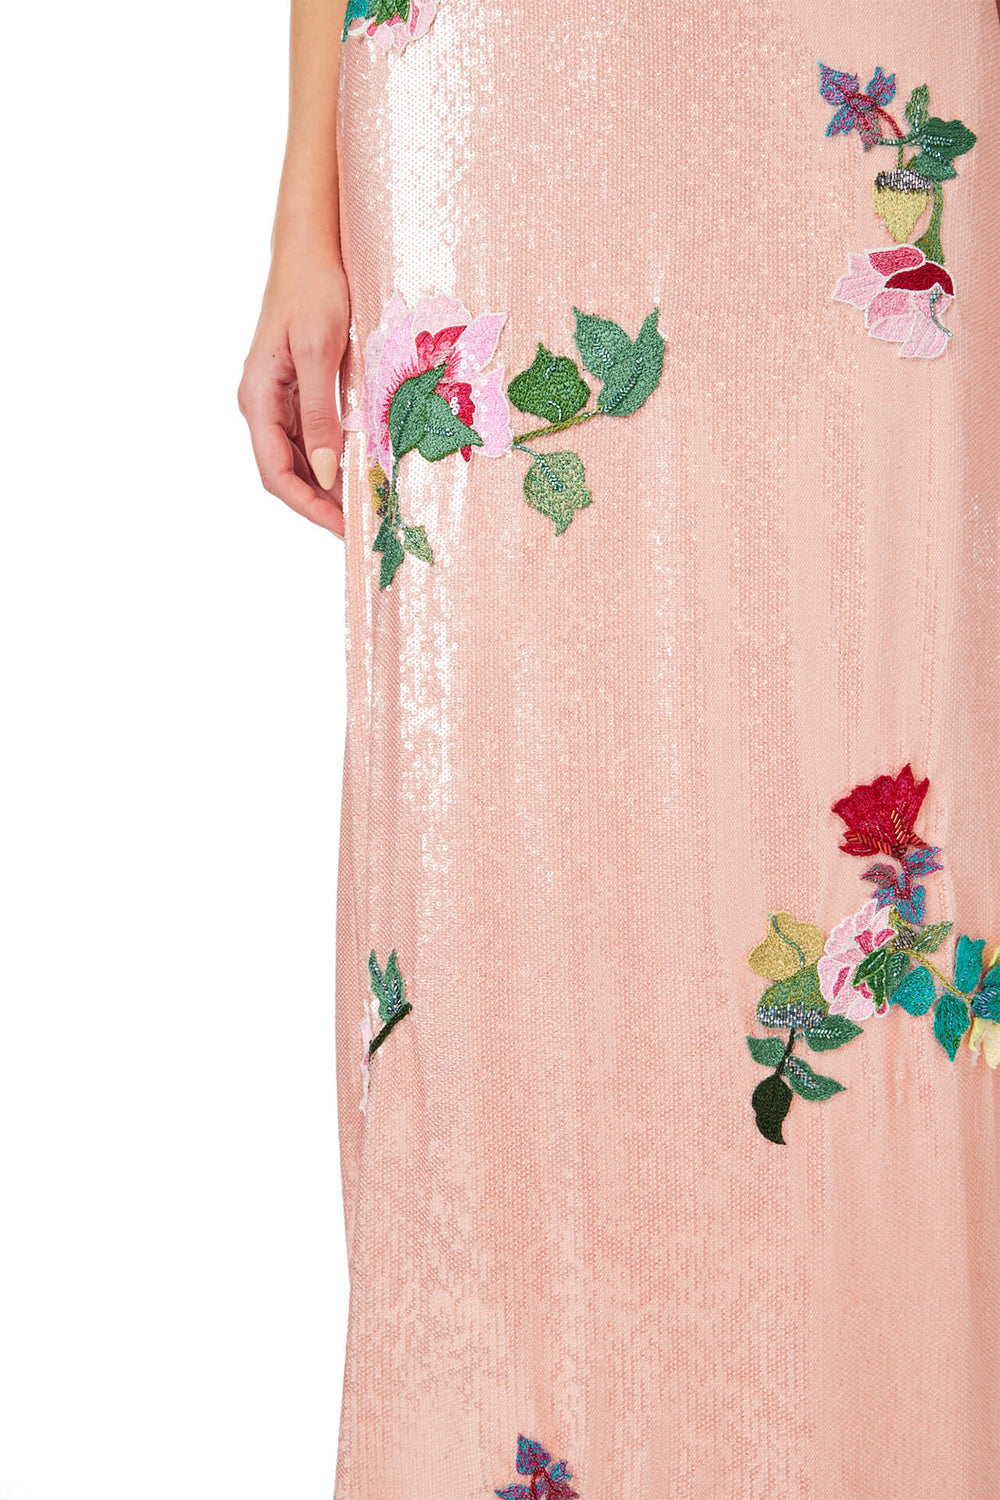 Monique Lhuillier Spring 2024 melon colored sequin gown with short sleeves, jewel neckline and multi-color floral embroidery - embroidery.